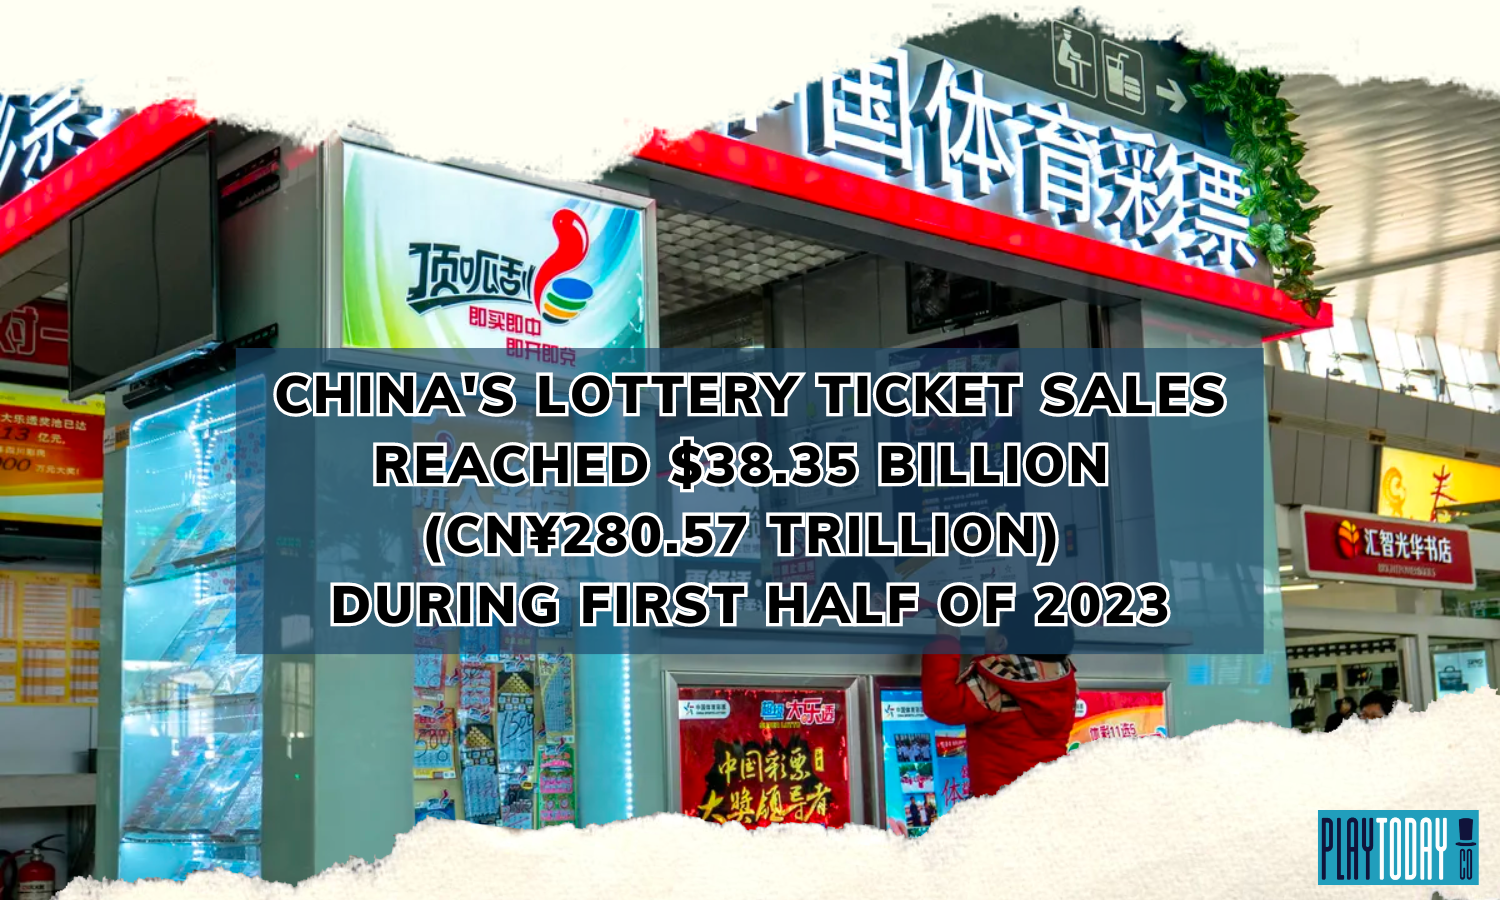 Visualizer of China’s Lottery Ticket Sales 2023